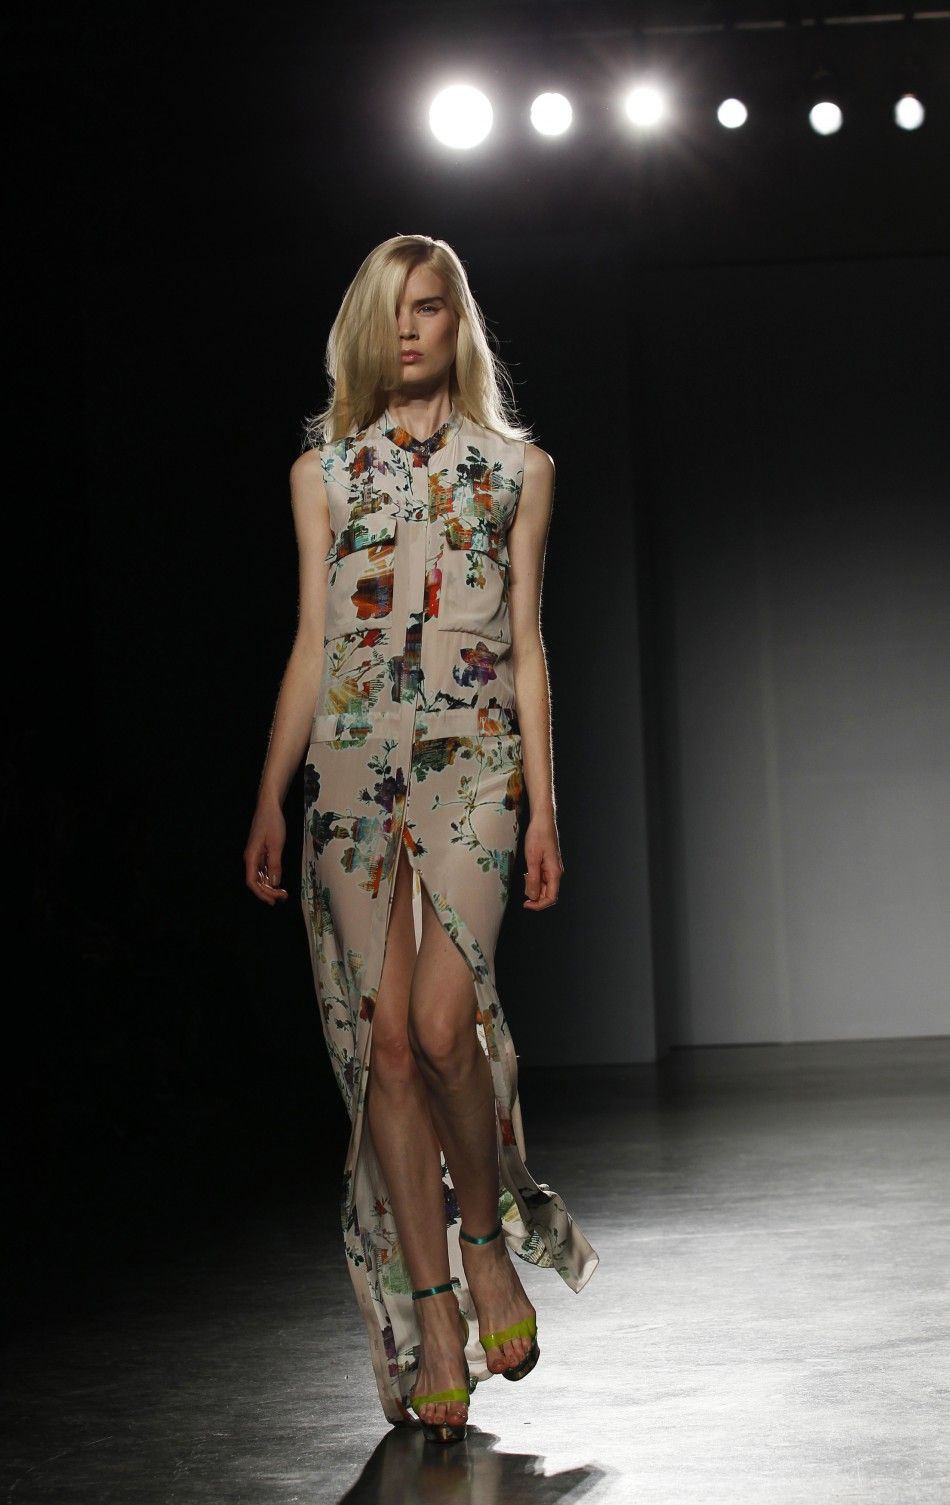 A model presents a creation from the Matthew Williamson 2012 SpringSummer collection during London Fashion Week